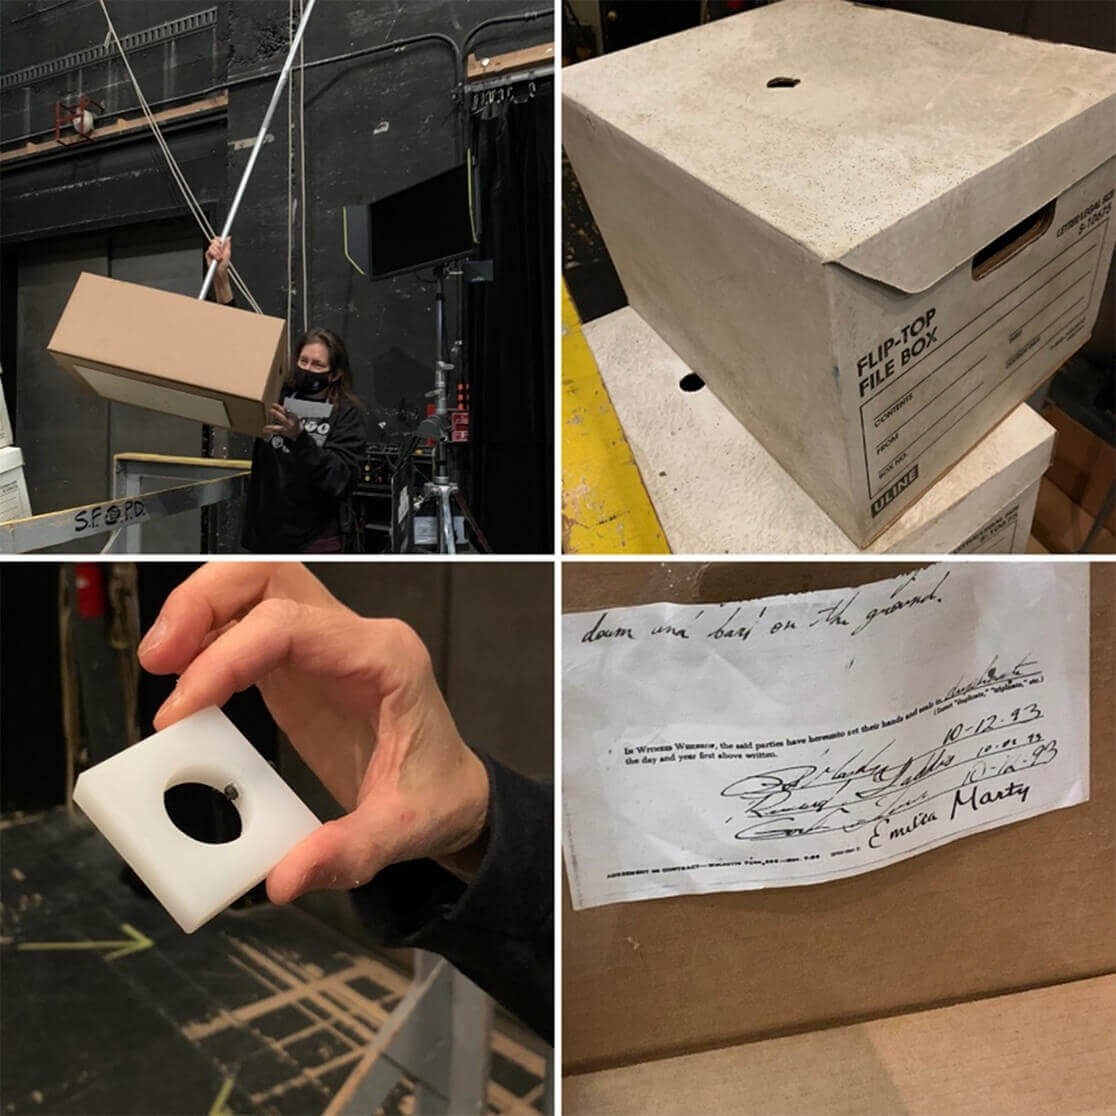 Manufacturing the stacks of boxes used in Act II.